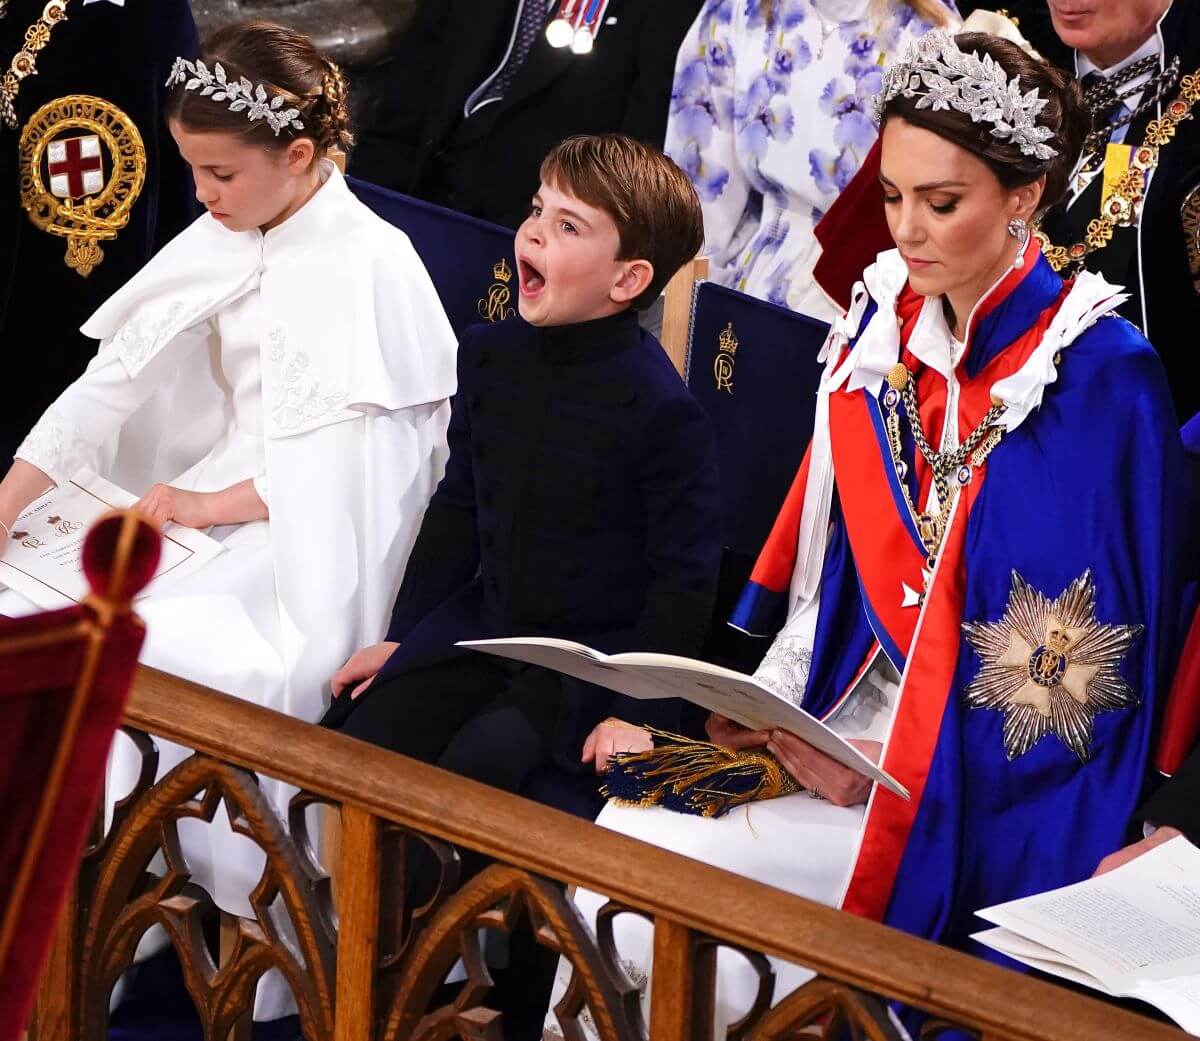 Princess Charlotte, Prince Louis, and Kate Middleton attend the Coronation of King Charles III and Queen Camilla at Westminster Abbey